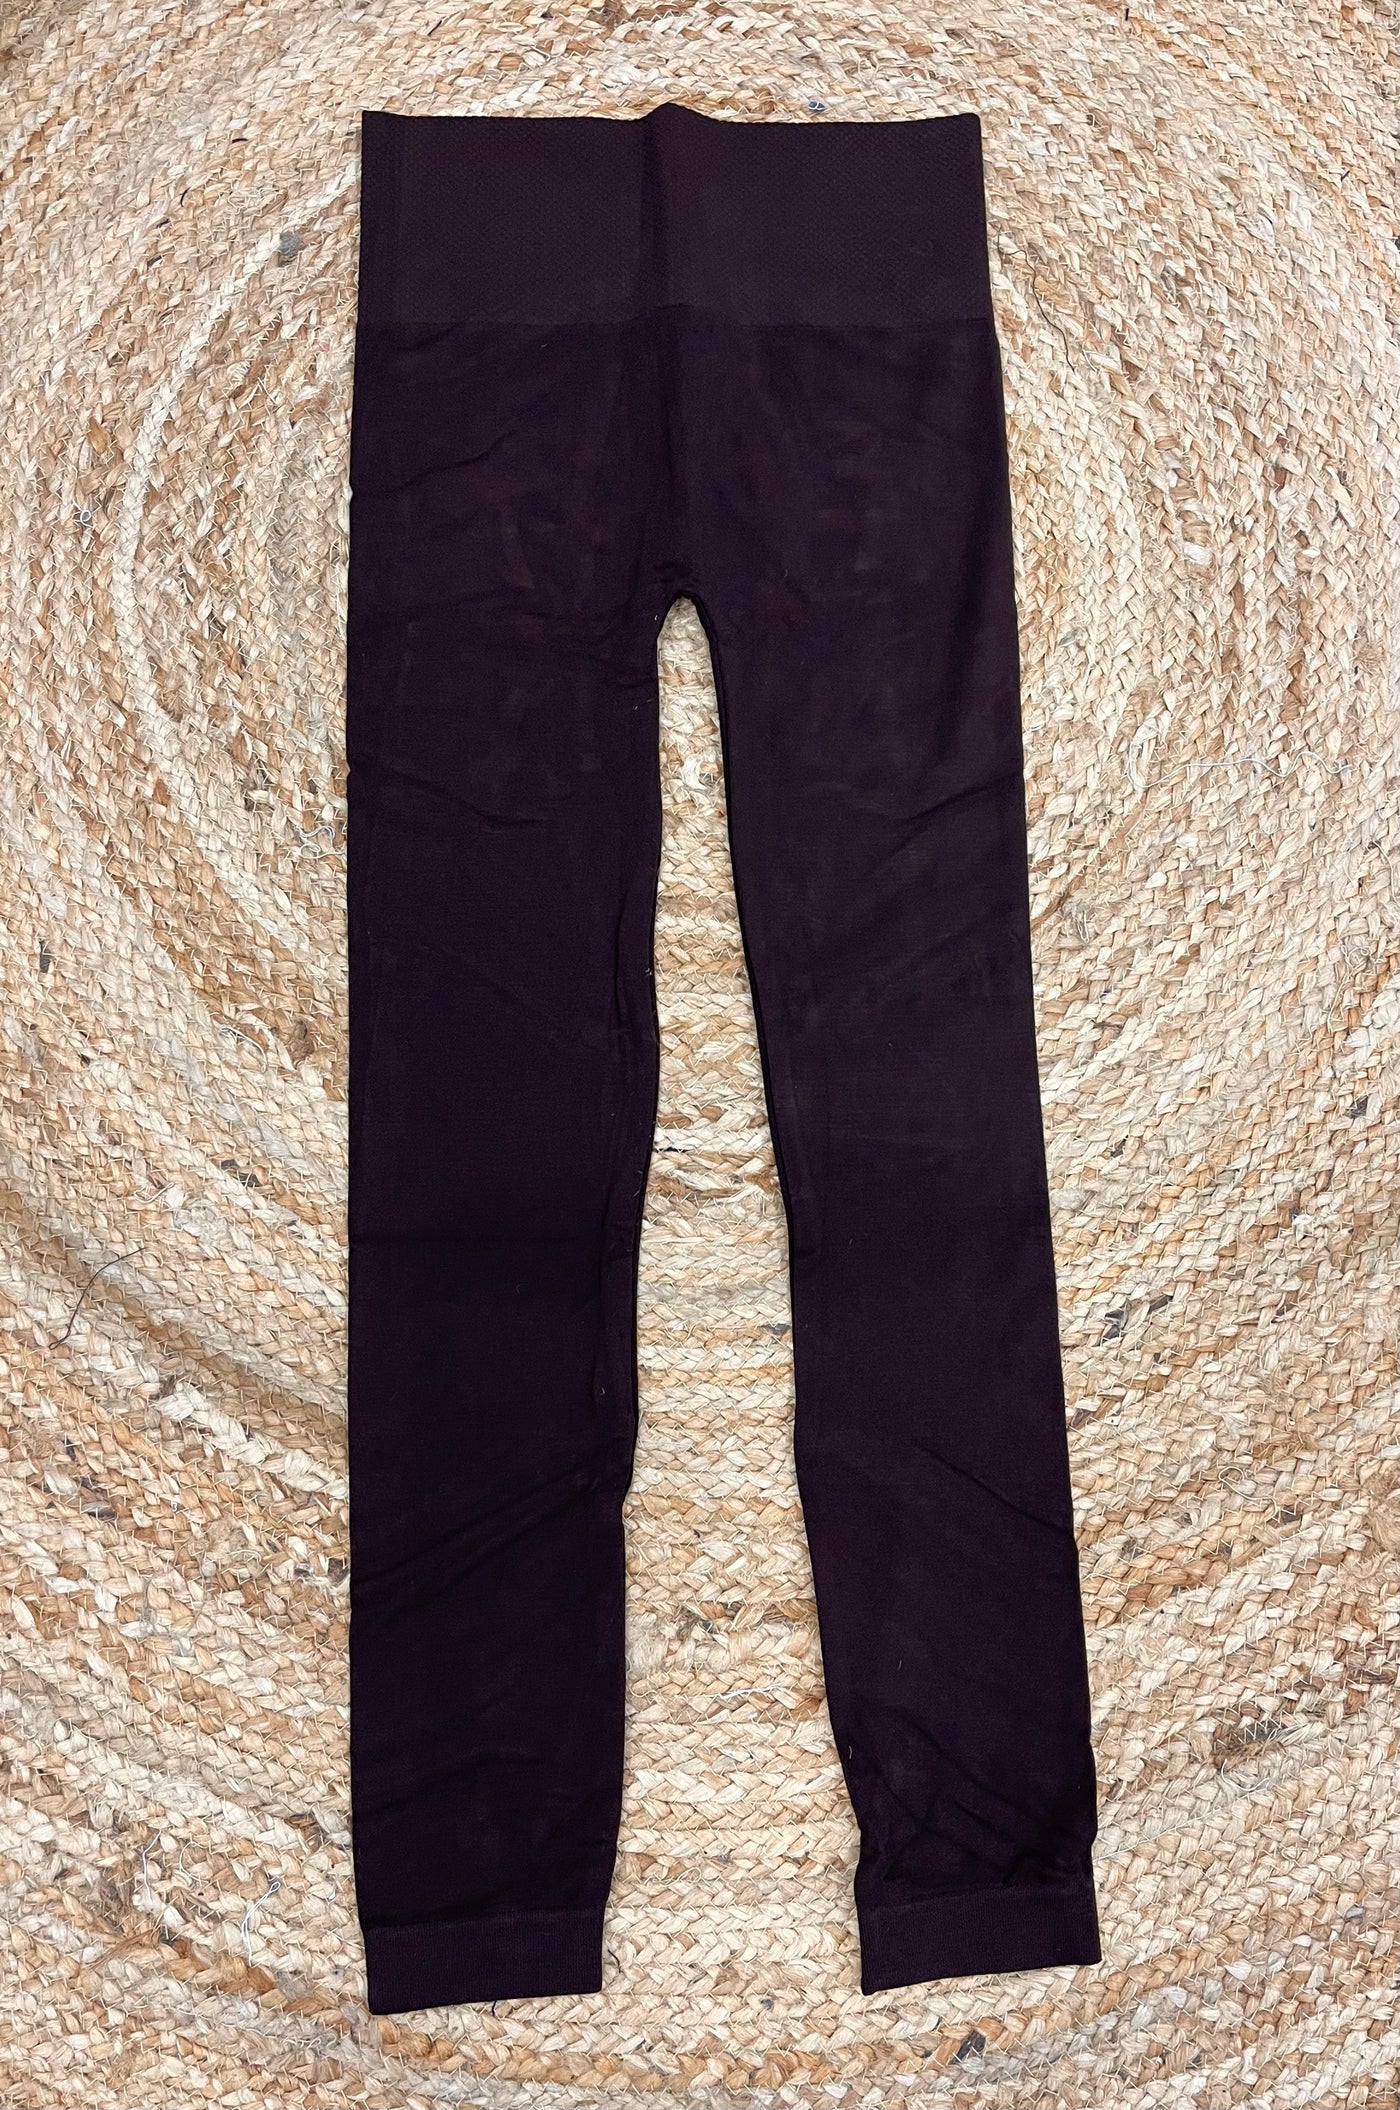 BAMBOO ULTRA 4" HIGH WAIST LEGGING- brown, navy or olive